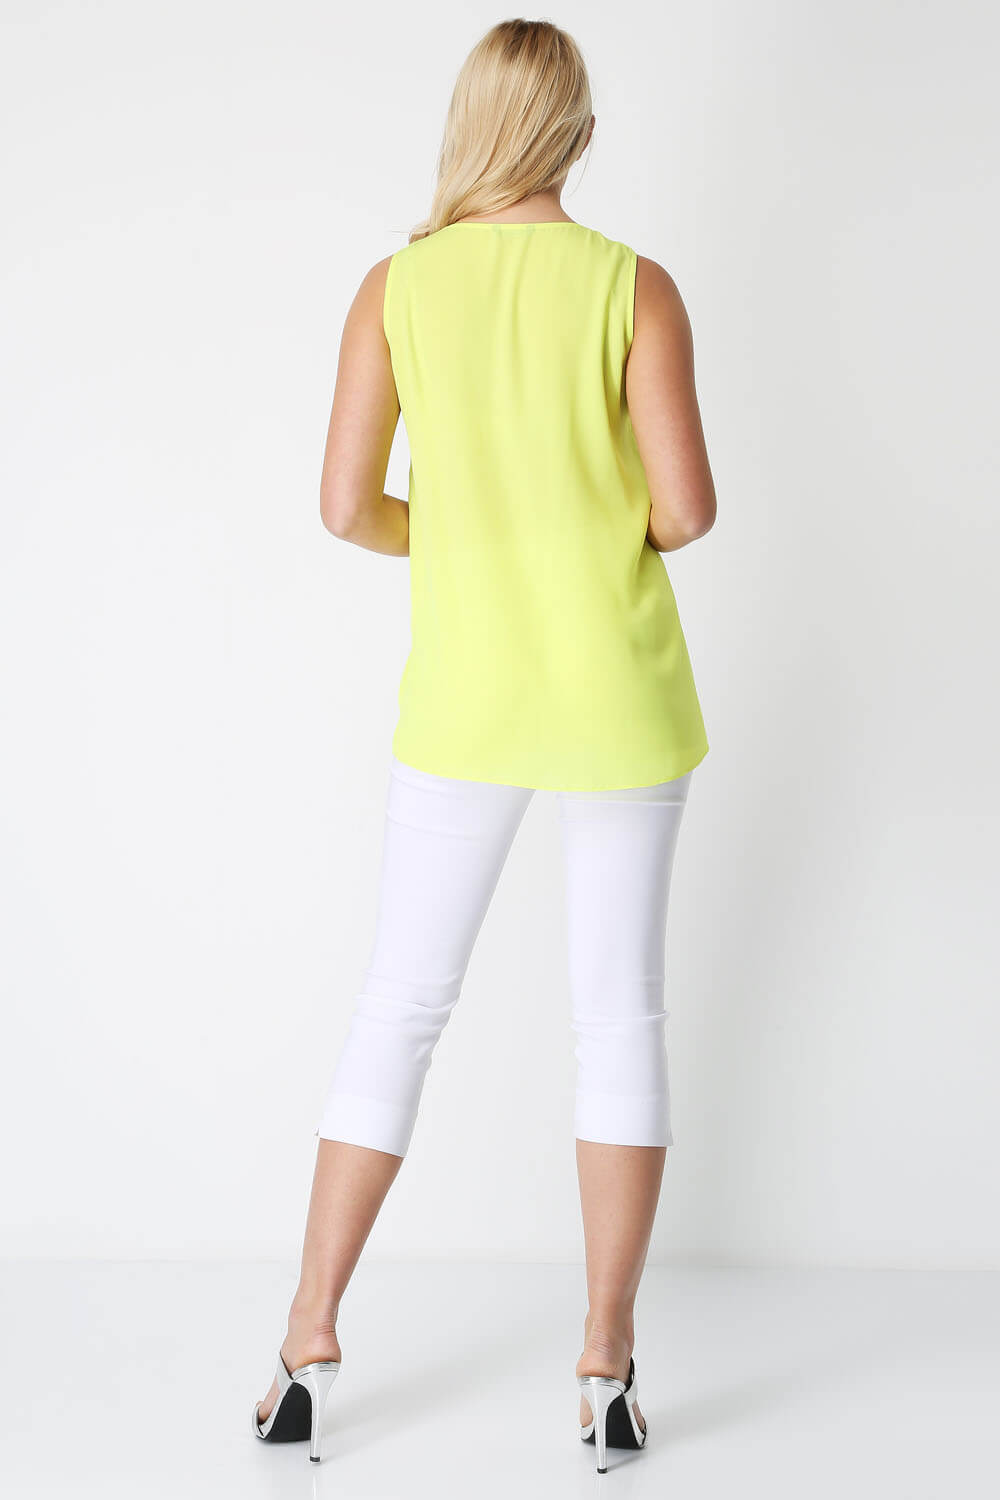 Lime Eyelet Detail Lace Up Vest Top, Image 3 of 8